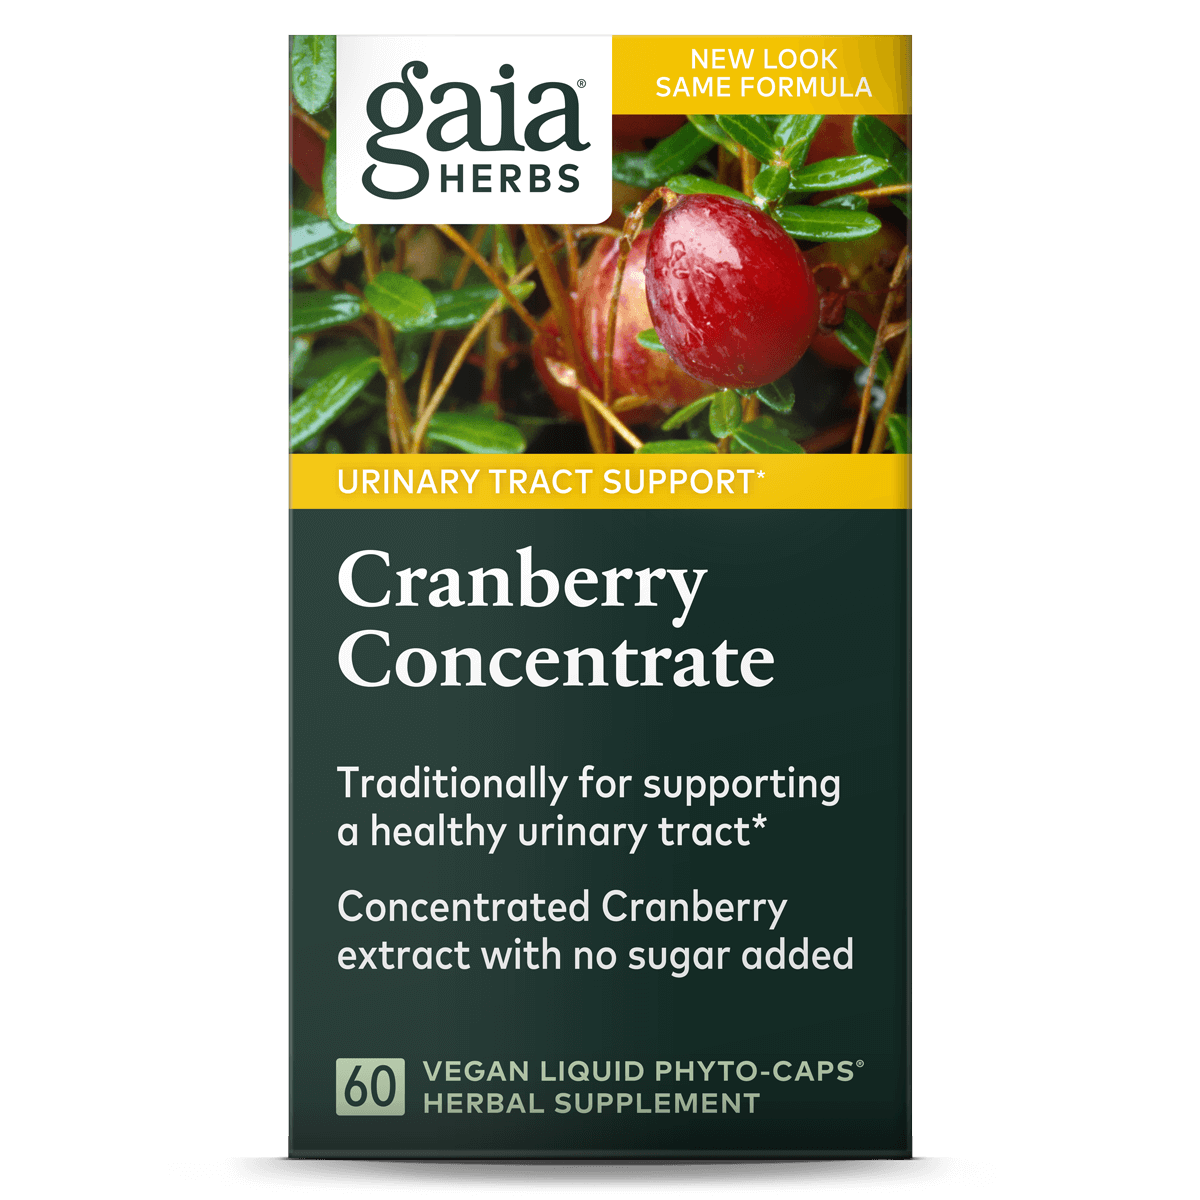 Gaia Herbs Cranberry Concentrate label